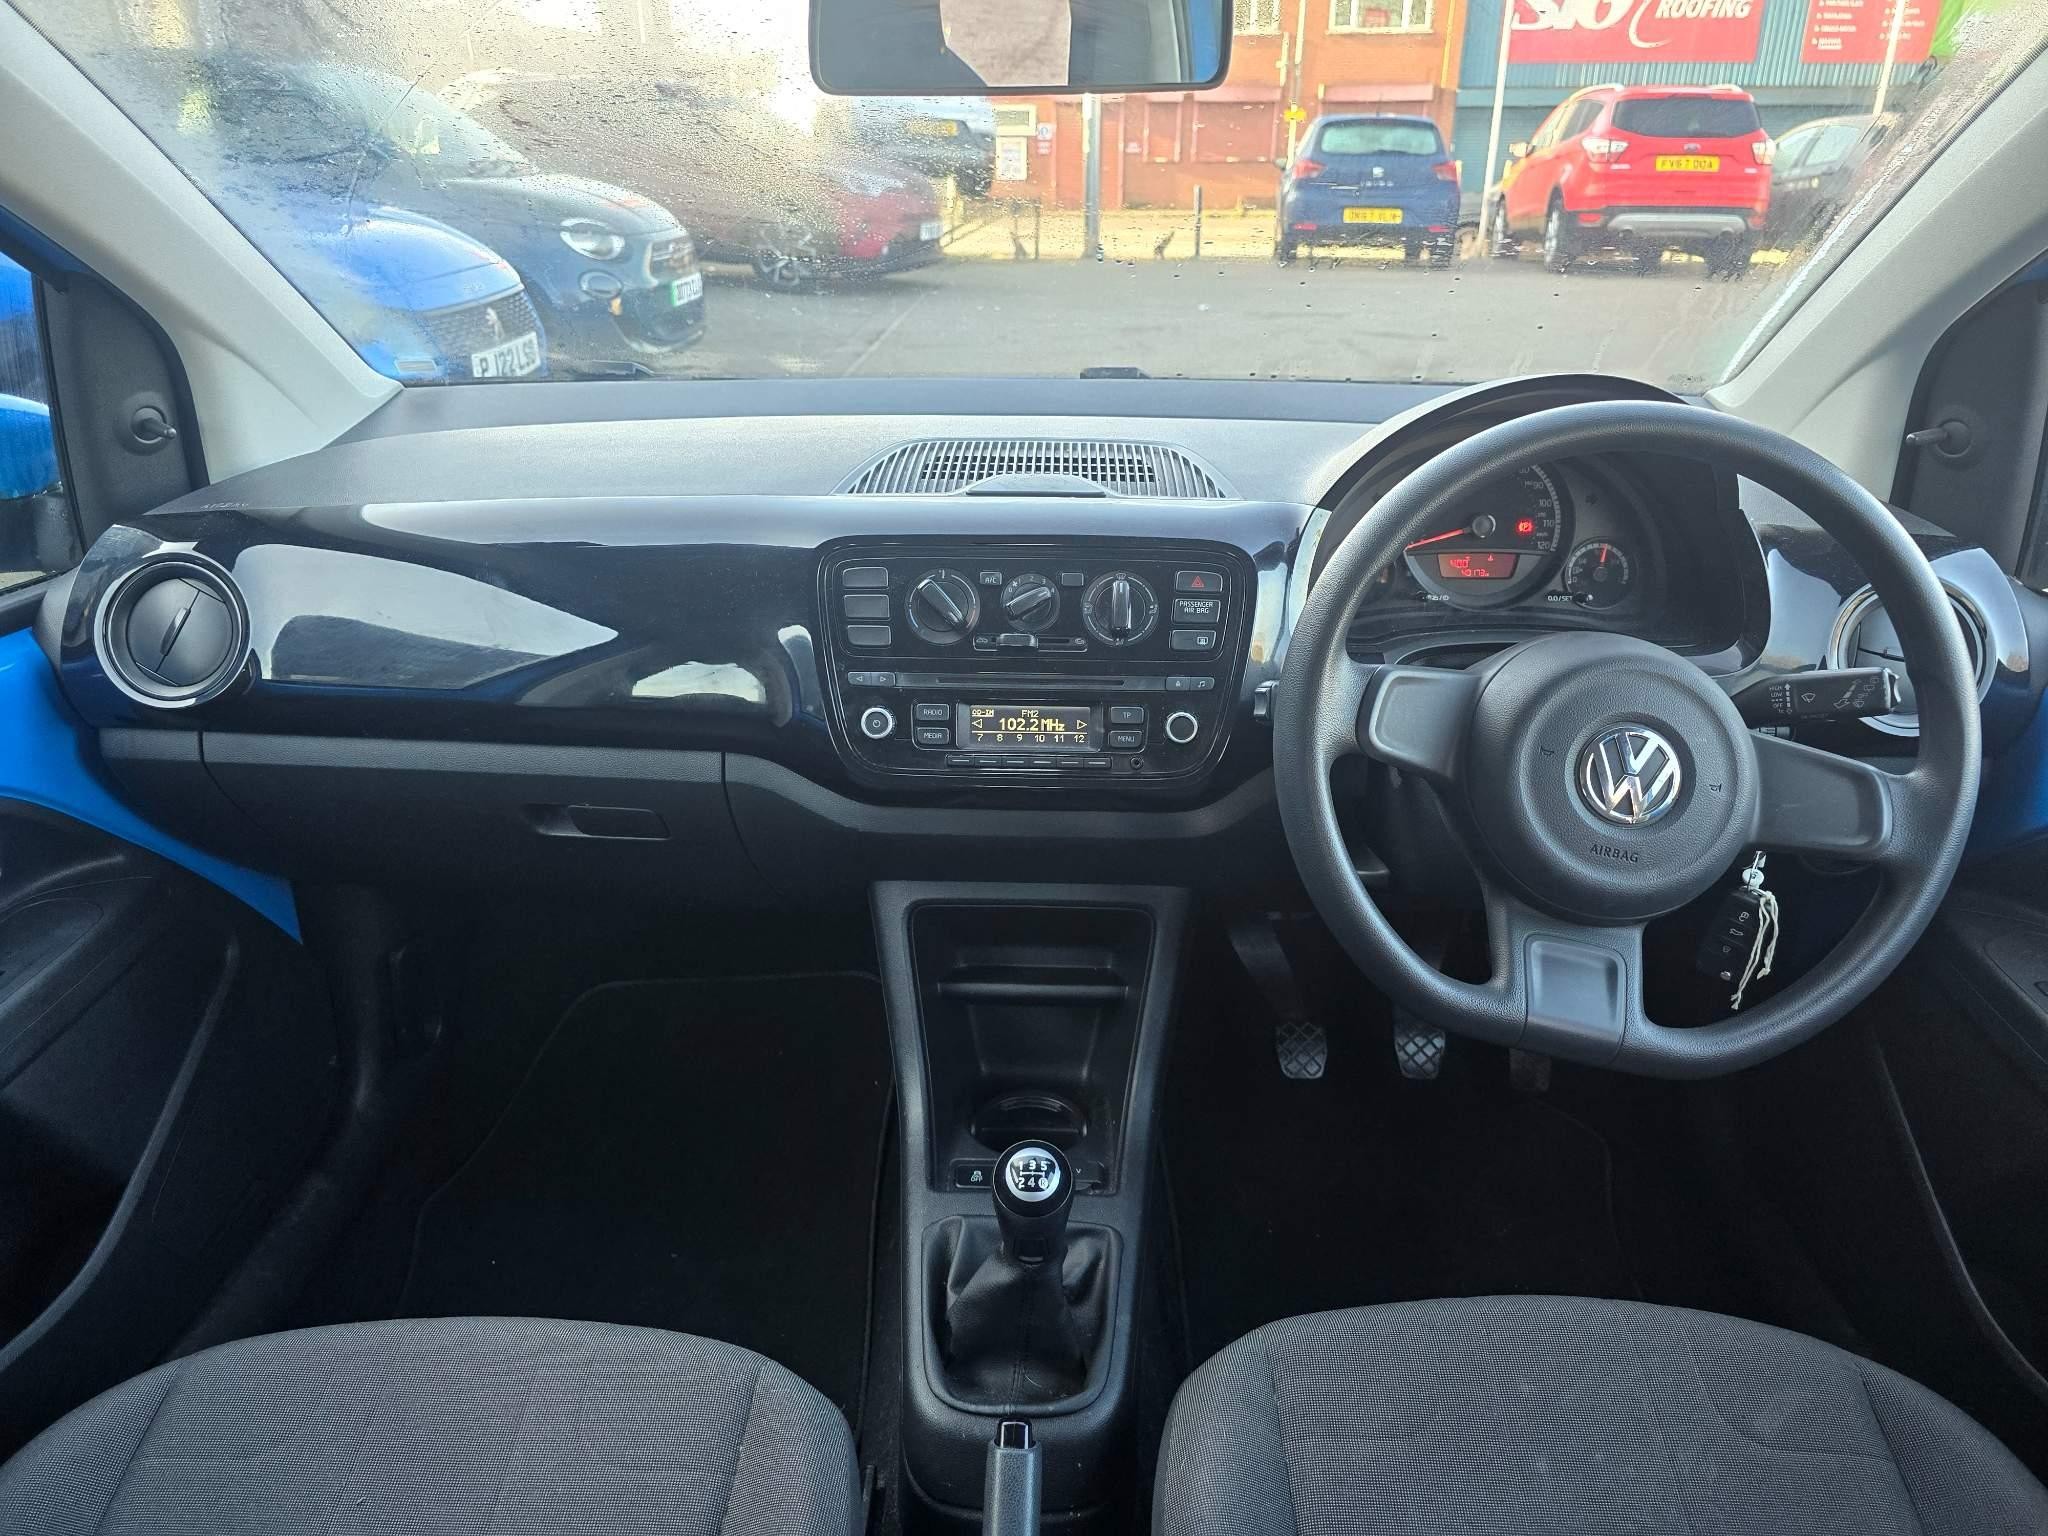 Volkswagen up! 1.0 Move up! Hatchback 5dr Petrol Manual Euro 6 (60 ps) (PJ65XPO) image 11